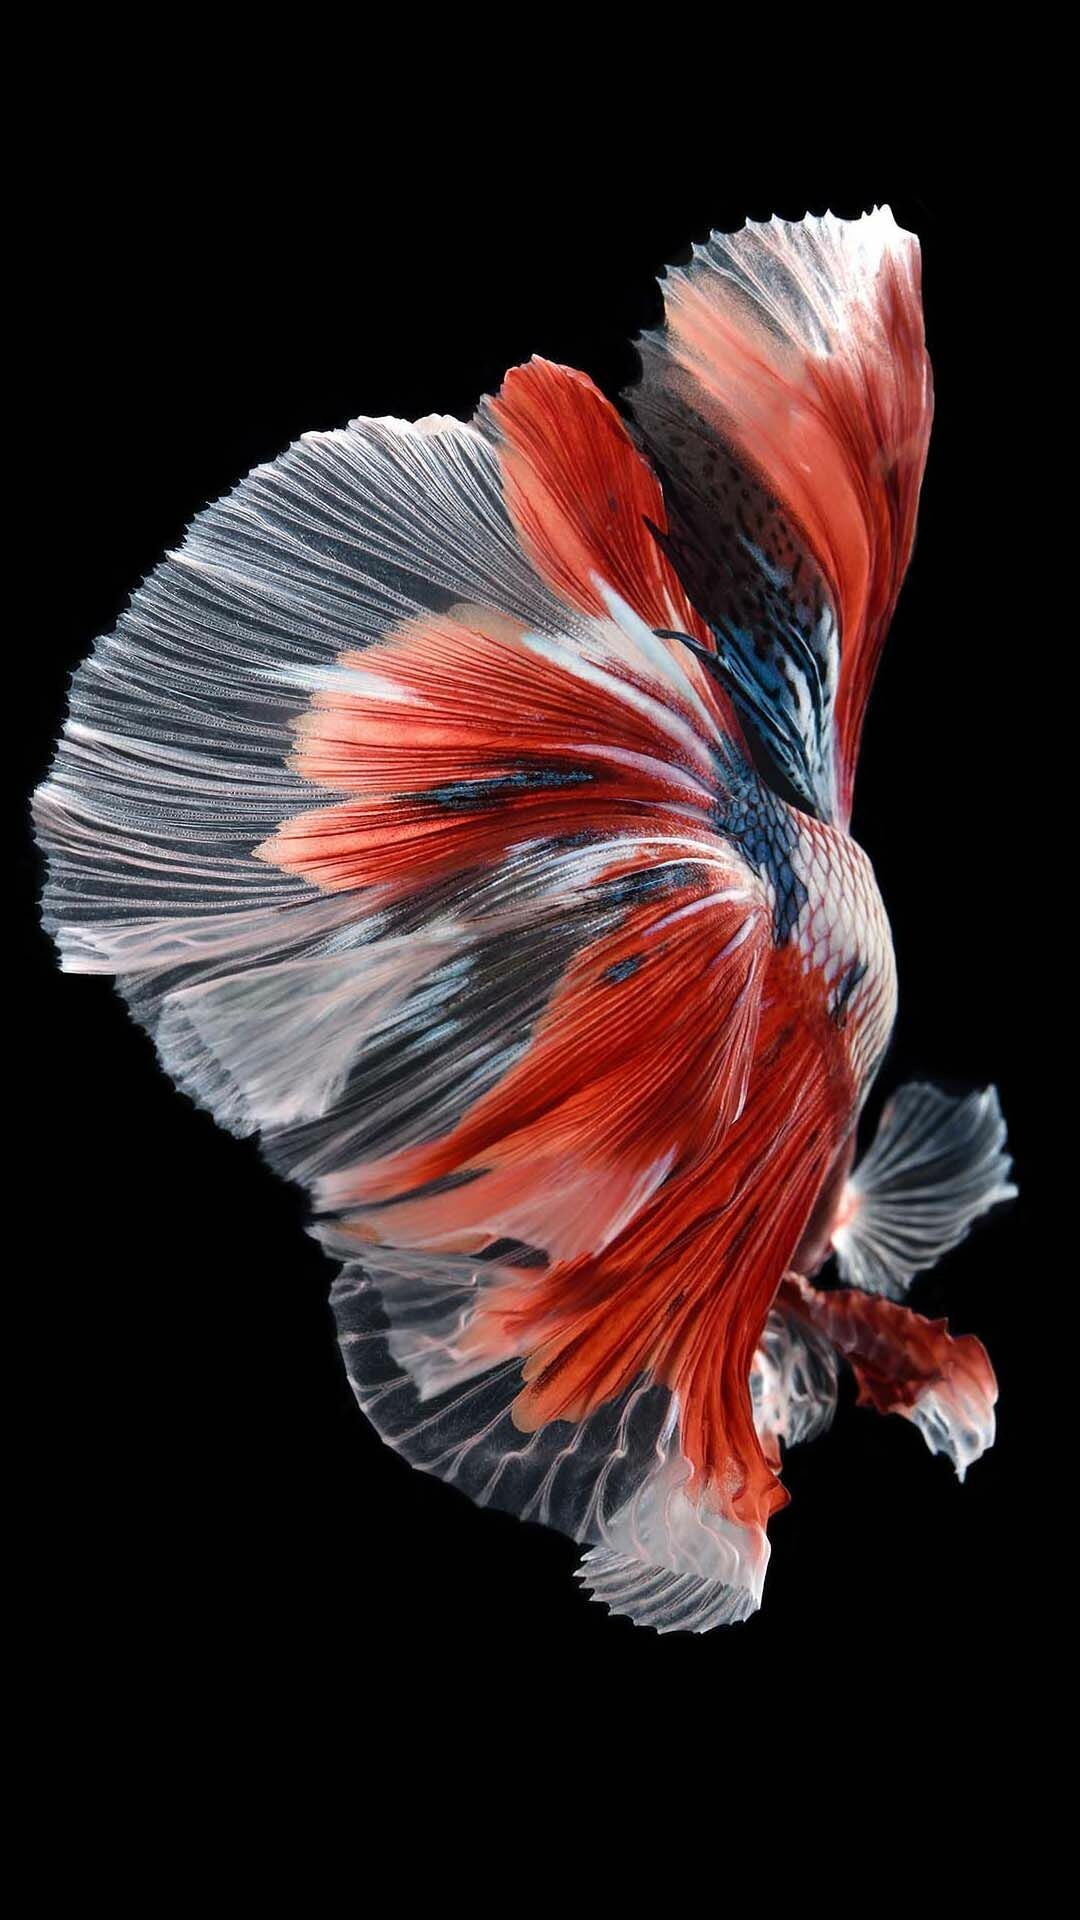 Fish: Aquatic species, Have gills, paired fins, a long body covered with scales. 1080x1920 Full HD Wallpaper.